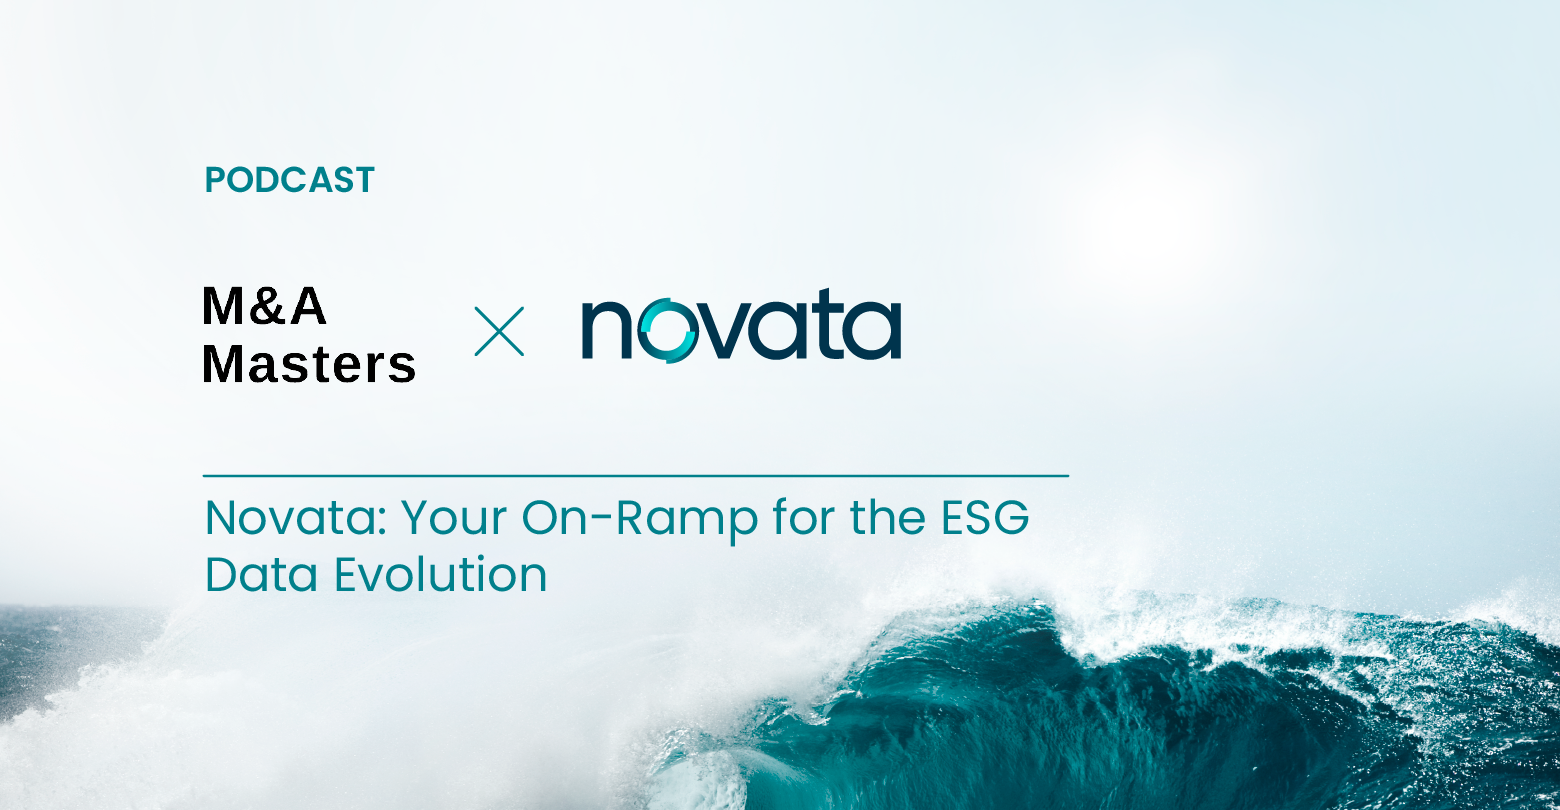 M&A Masters and Novata. Novata: Your On-Ramp for the ESG Data Evolution